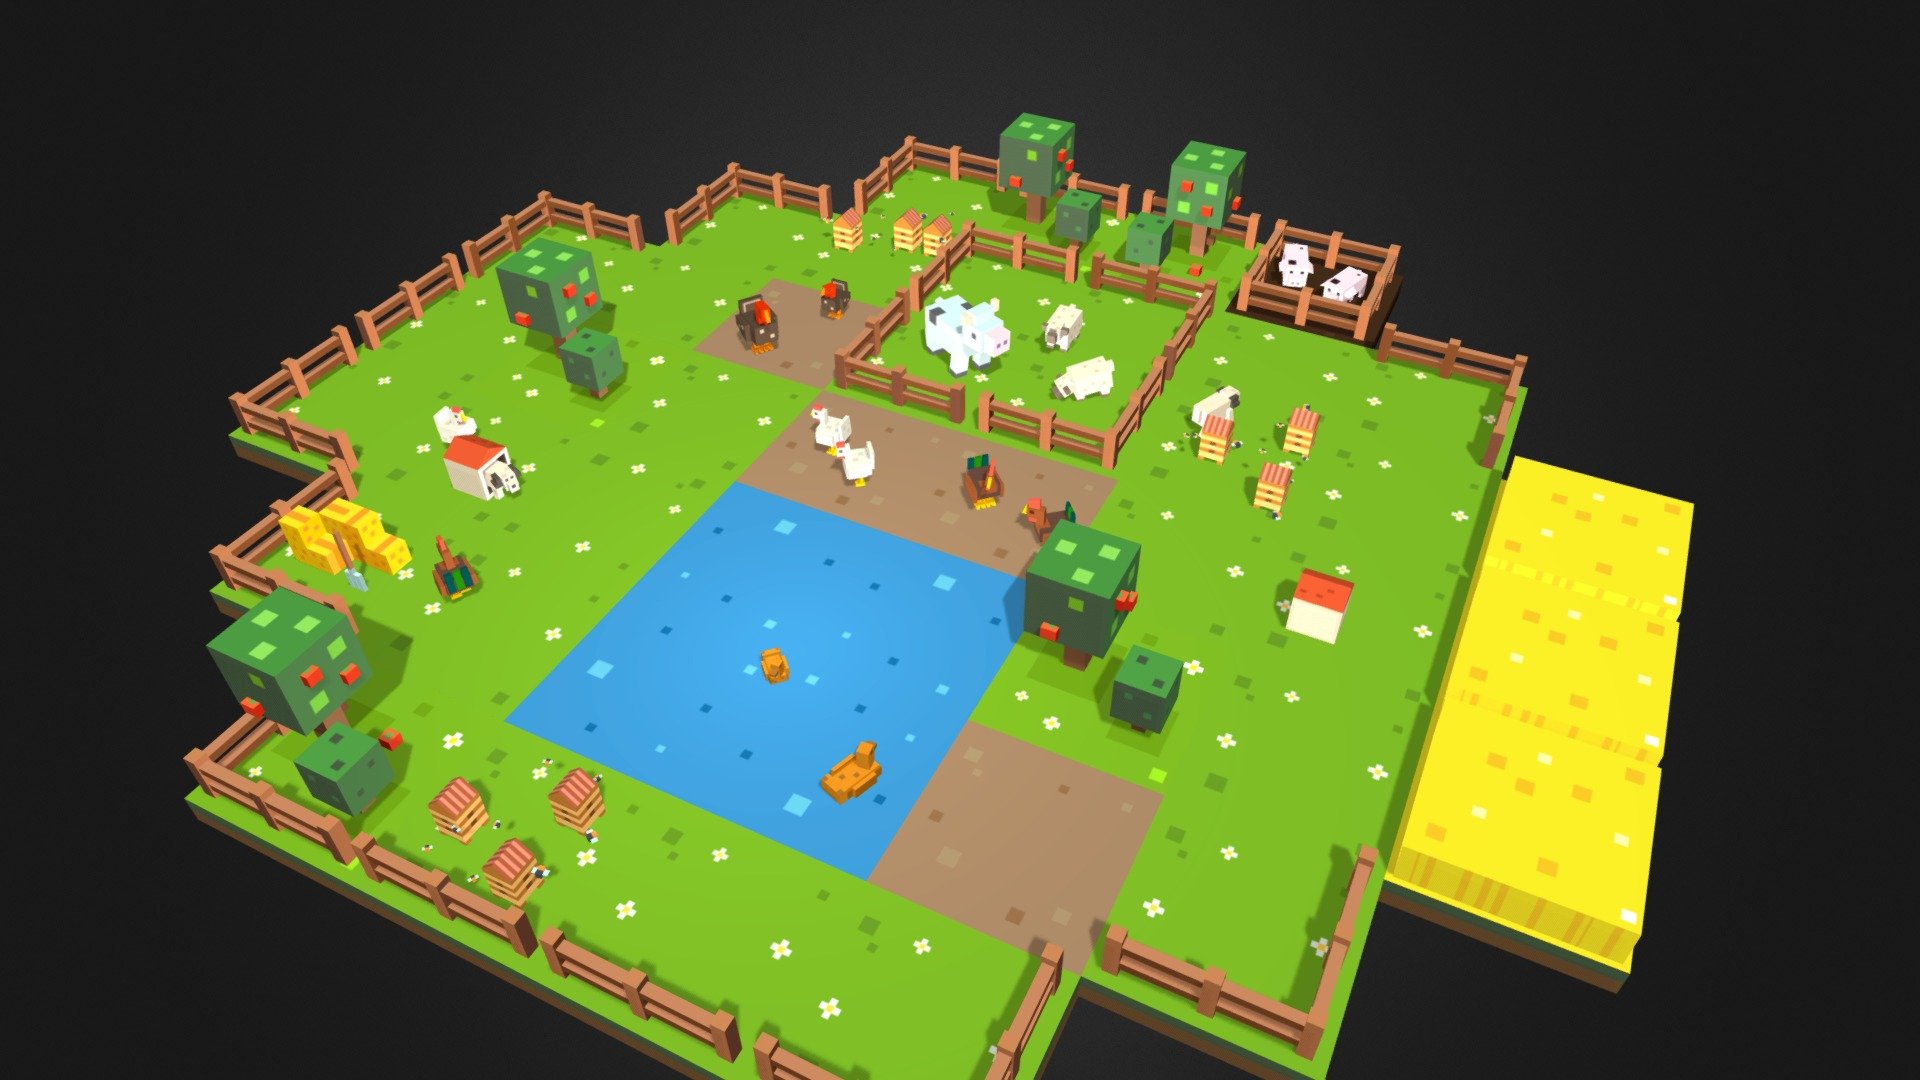 Lowpoly farm animals

**Animations **

chicken, cock, cow, turkey, dog, pig, sheep




Idle

Walk

Eating

Sitting

Hive




Idle

Duck




Idle

Polygons




Duck - 68

Chicken - 170

Cock - 198

Cow - 132

Dog - 162

Hive - 104

Pig - 94

Sheep - 106

Turkey - 164

This pack is also contains




Ground sand

Ground mud

Ground rye

Ground grass

Ground water

Apple tree

Fence

Pitchfork

Texture size - 1024x1024 - png

Enjoy it! - Lowpoly farm animals - Buy Royalty Free 3D model by TheGameAssets 3d model